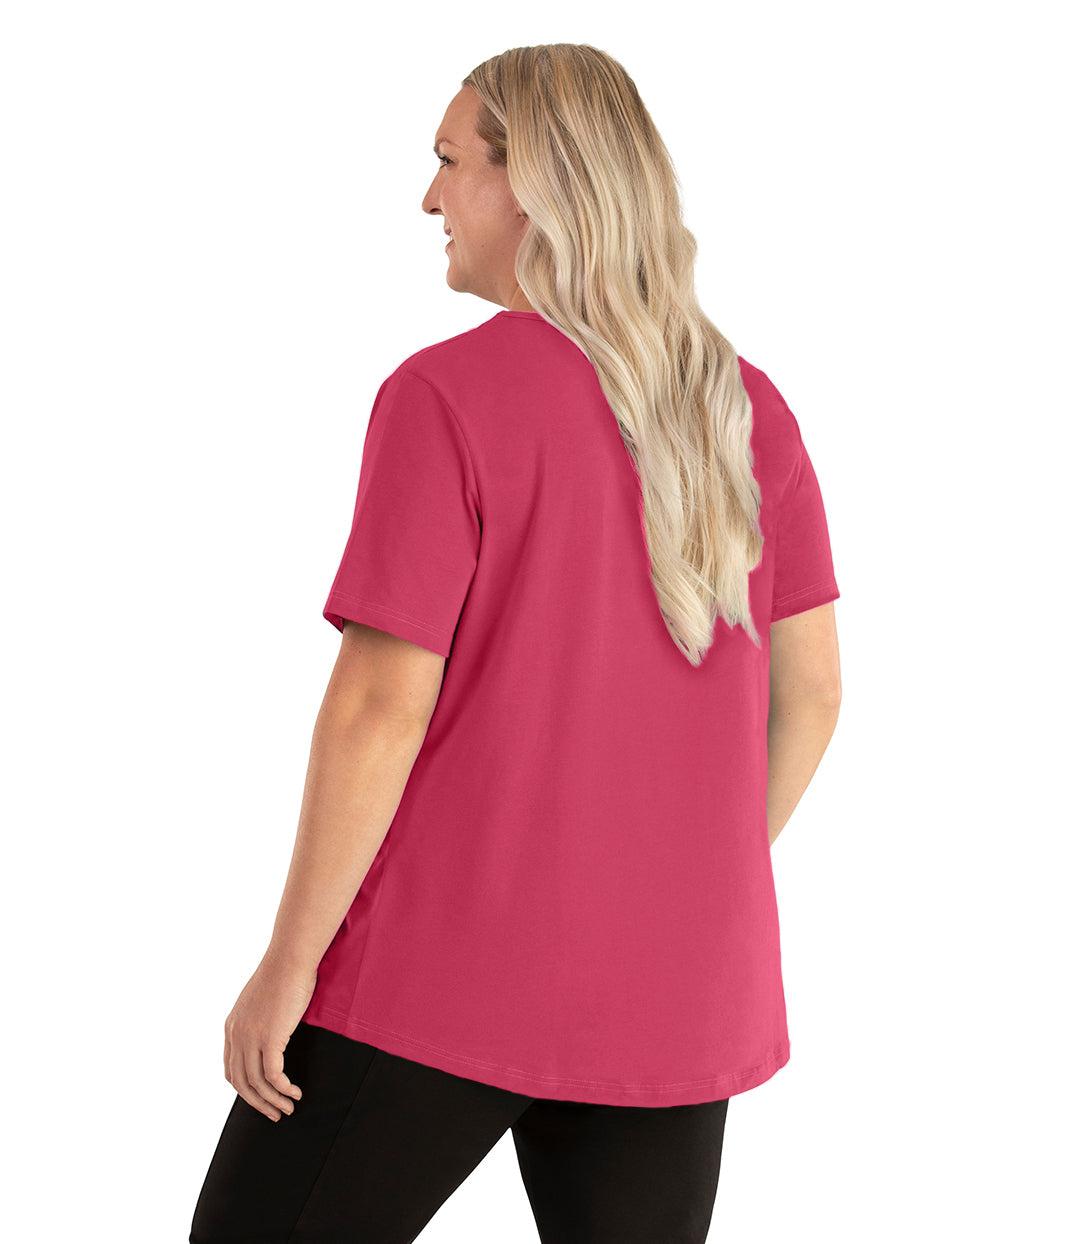  Plus size woman, facing back left, wearing JunoActive plus size Stretch Naturals Lite Short Sleeve Scoop Neck Top in the color carnation pink. She is wearing JunoActive Plus Size Leggings in the color black.